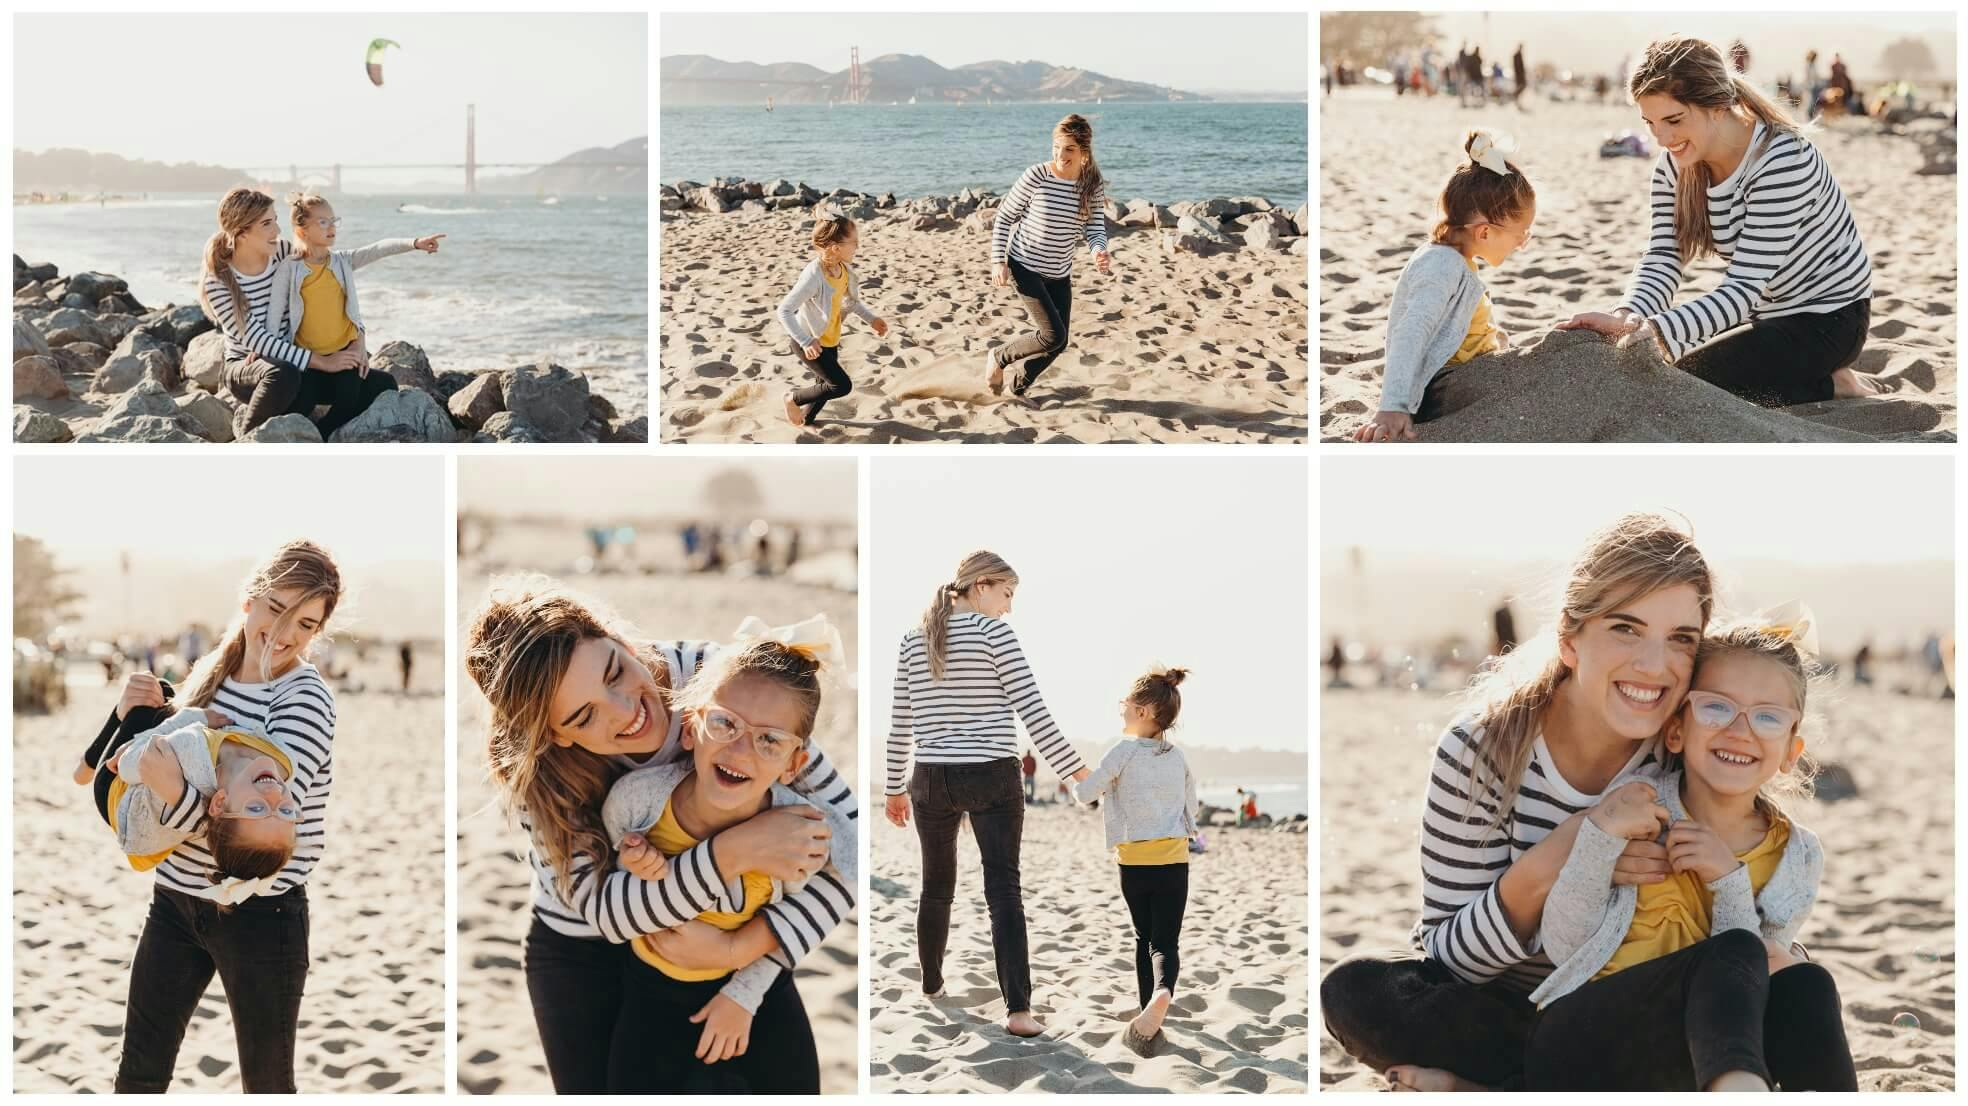 A collage of images showing a woman and child playing on the beach.